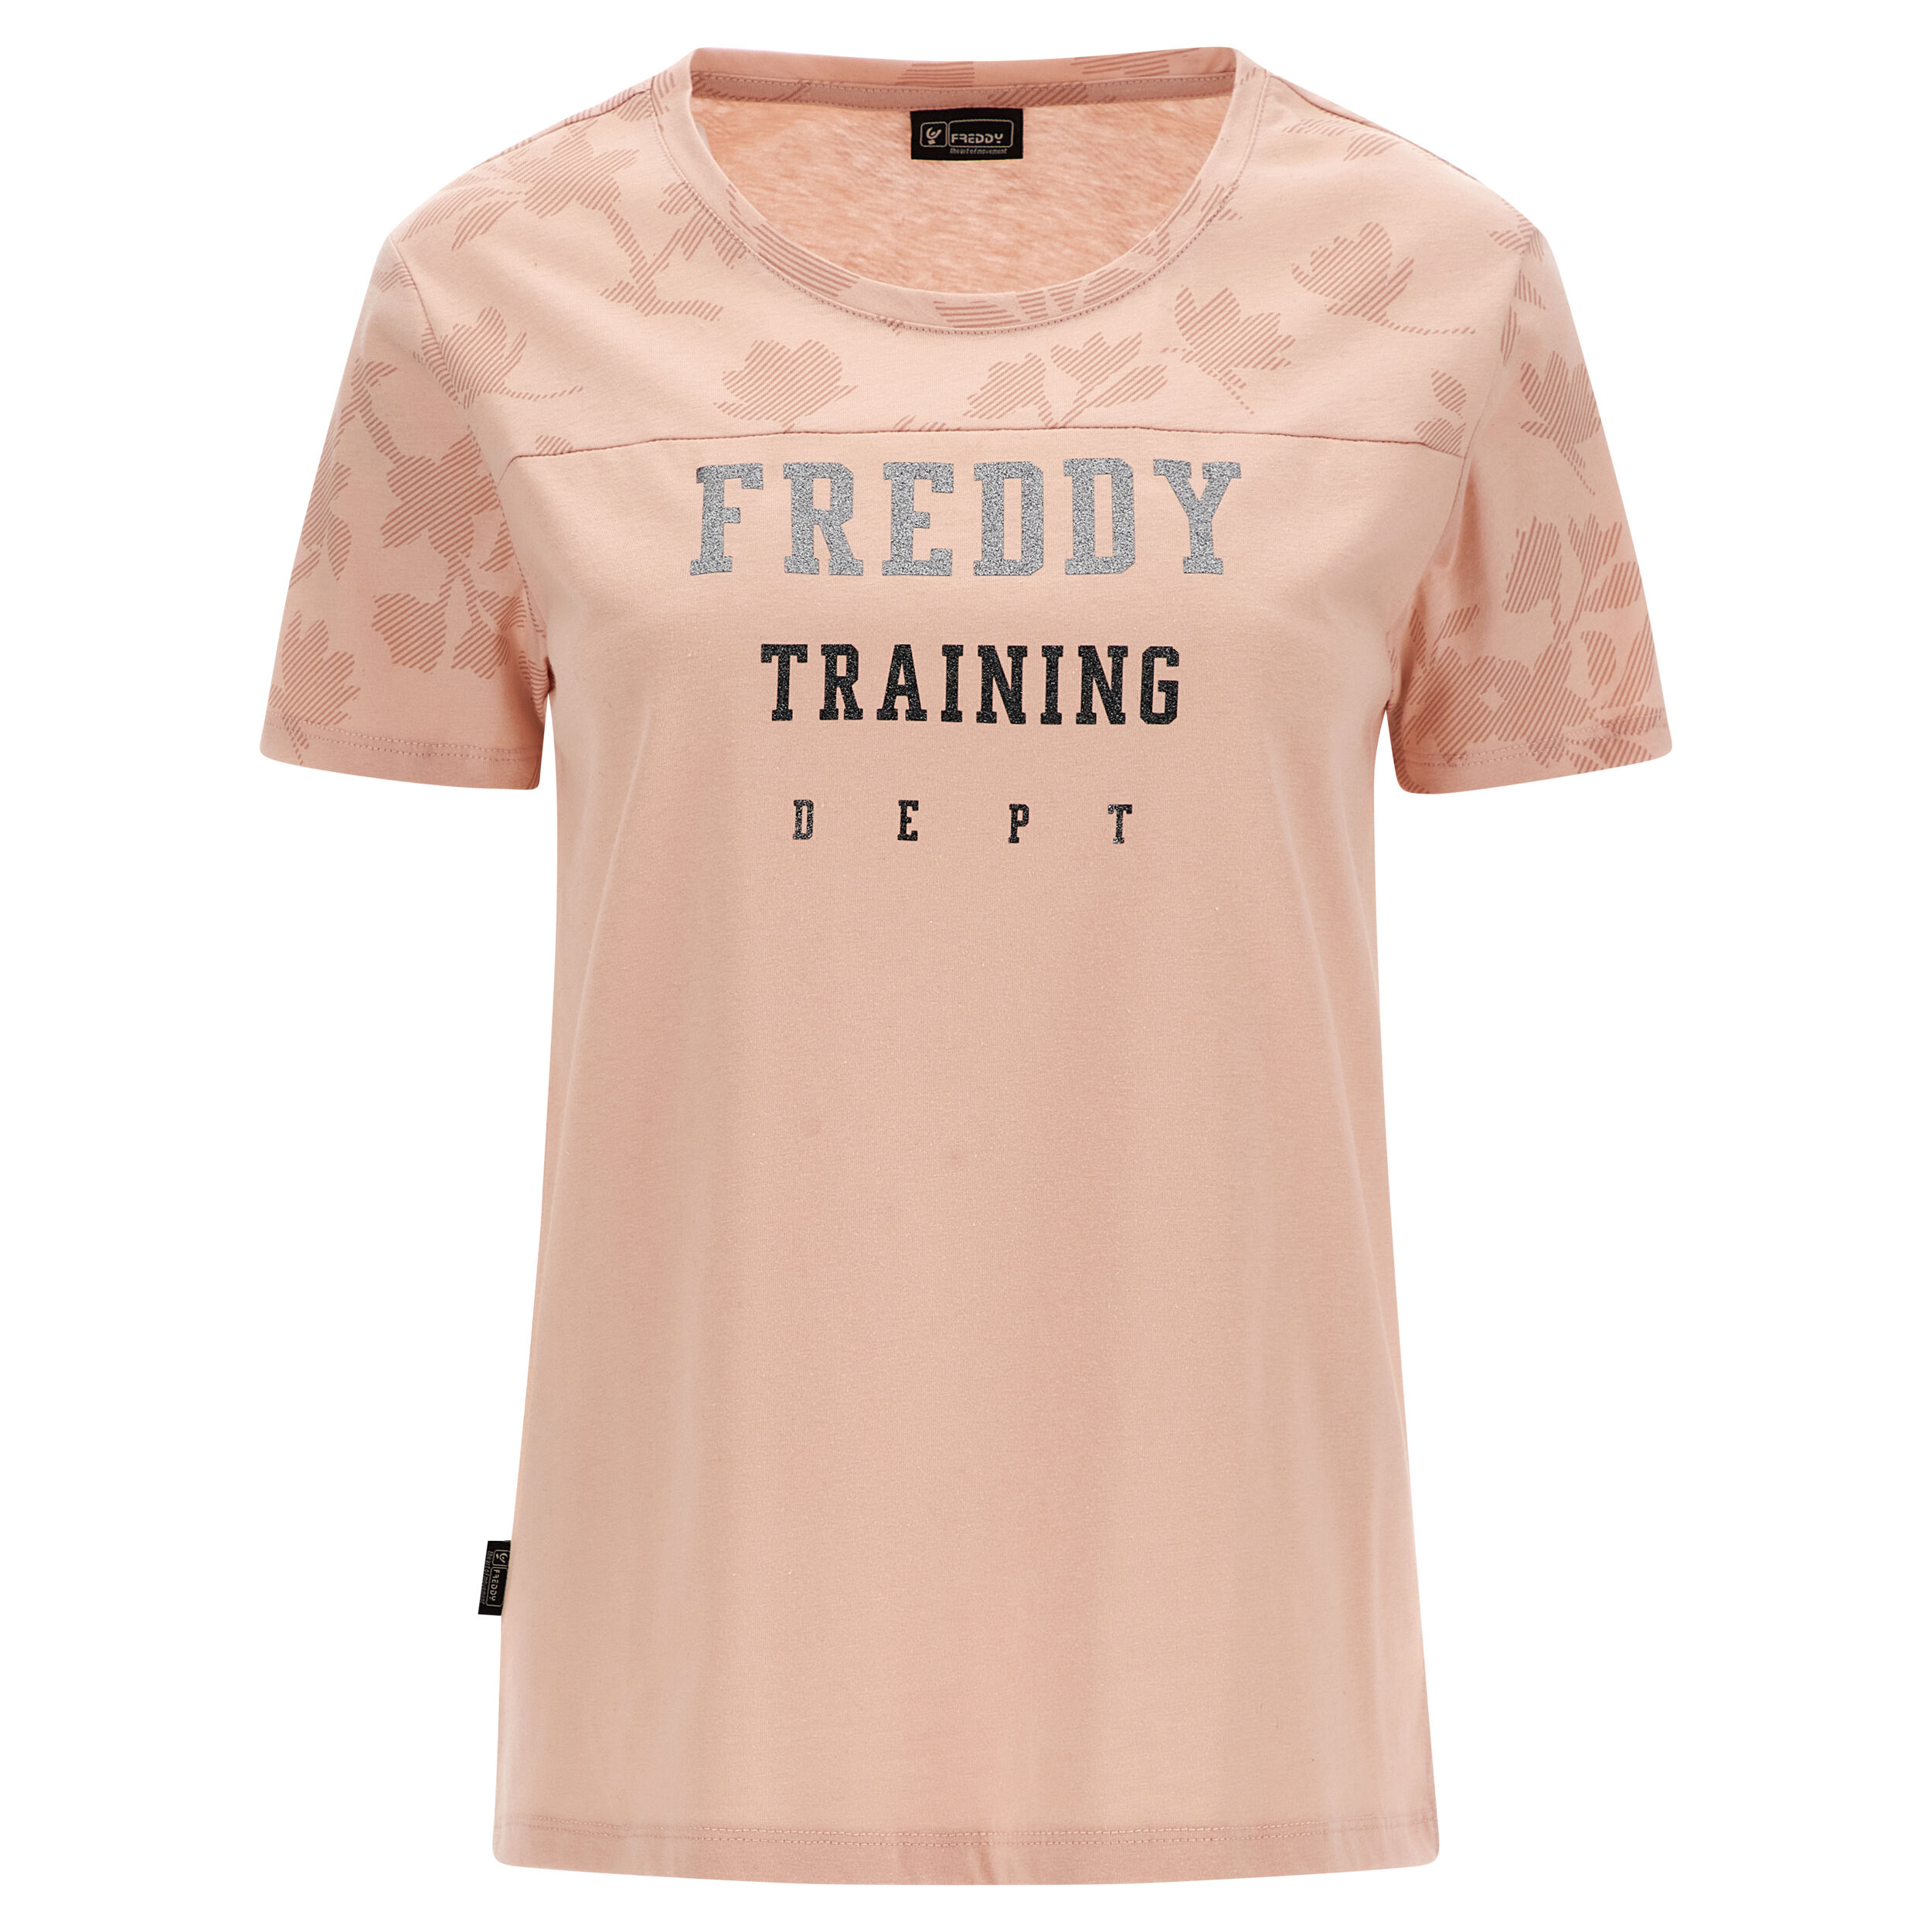 Freddy T-shirt comfort fit con maniche e spalle stampa floreale Pink-Allover Flower Pink Donna Extra Small